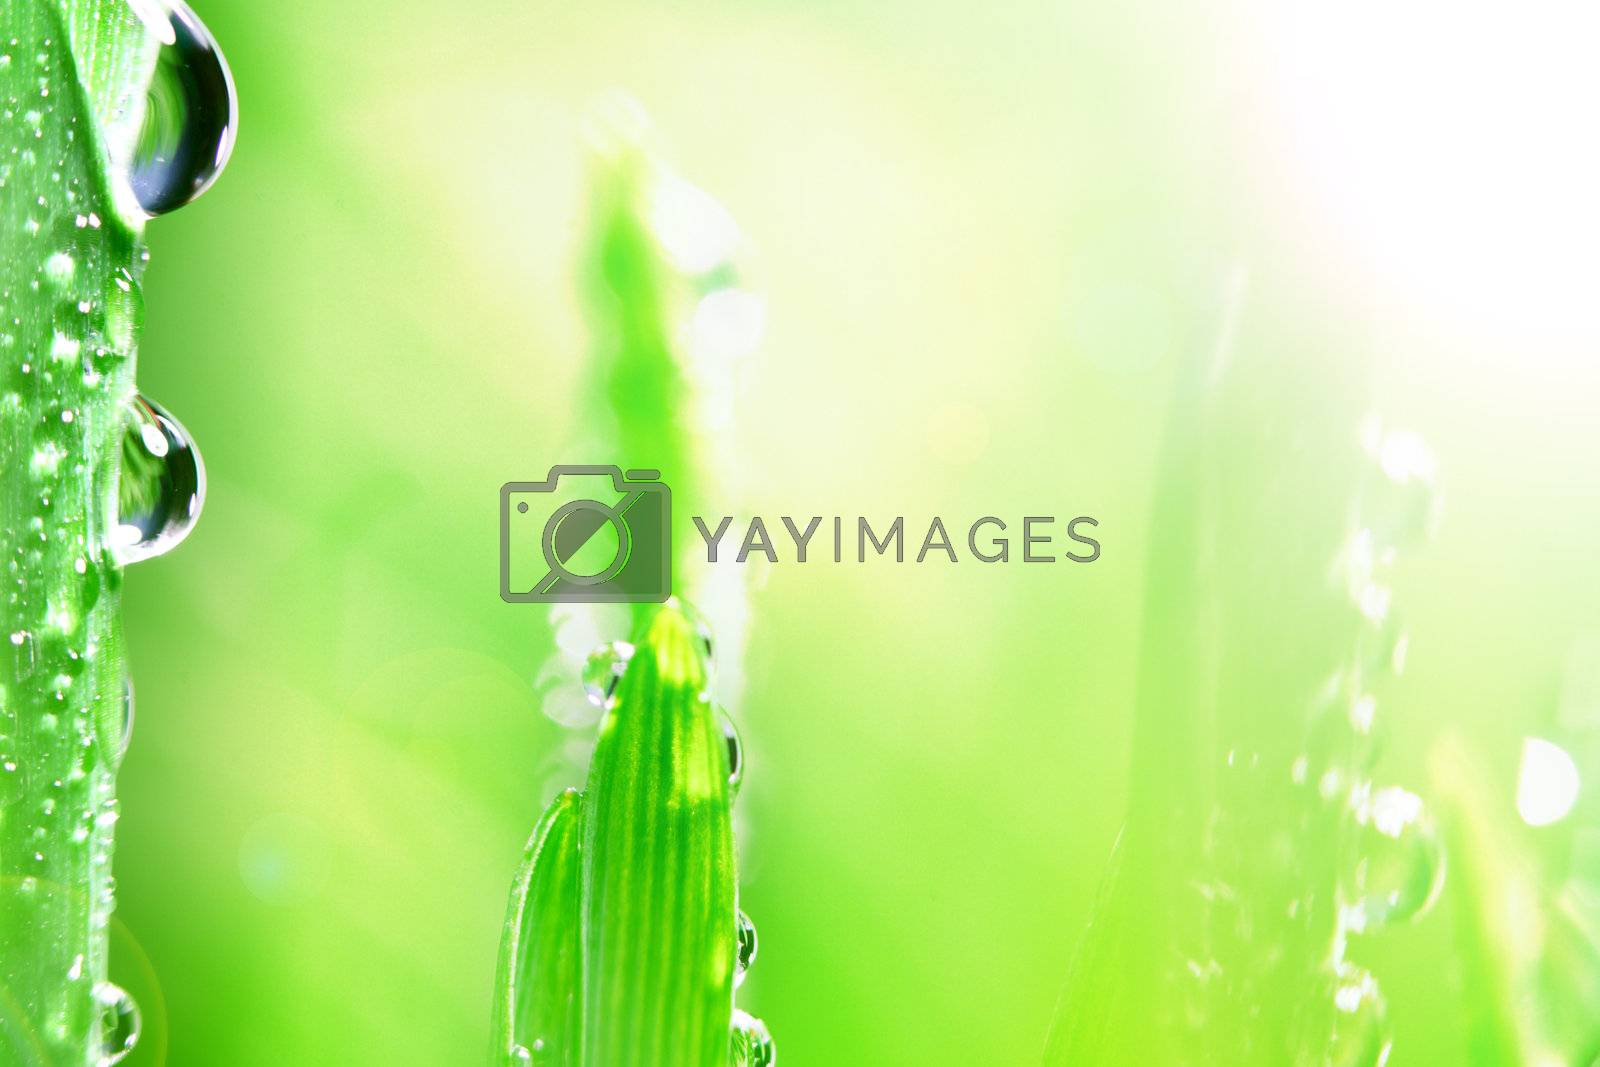 Royalty free image of shine water drop by Yellowj